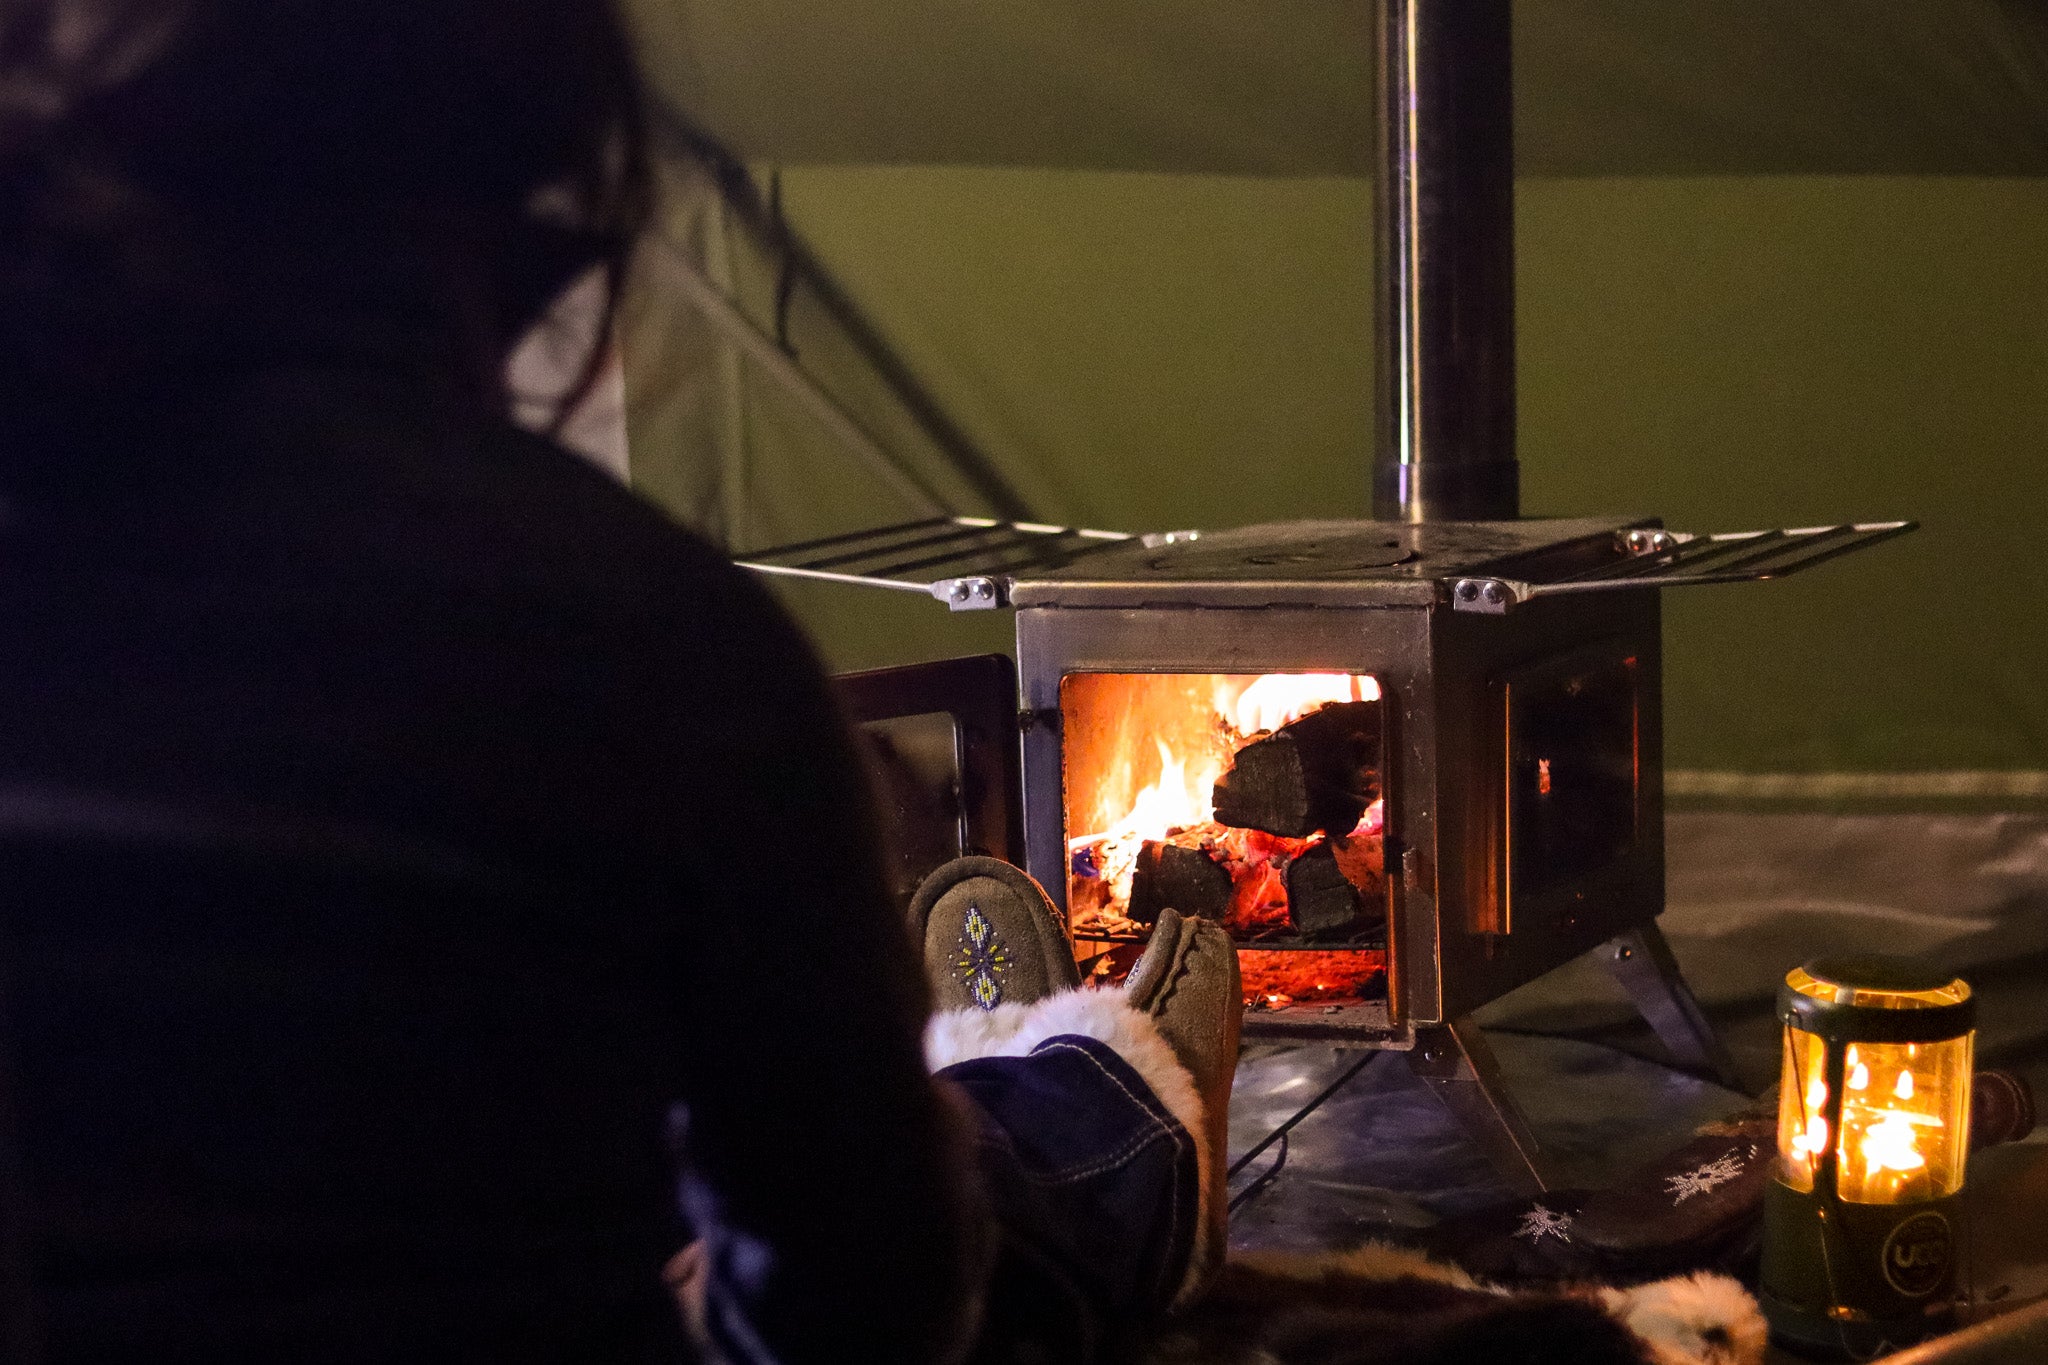 Canvas Camping In Cold Weather - How To Enjoy It